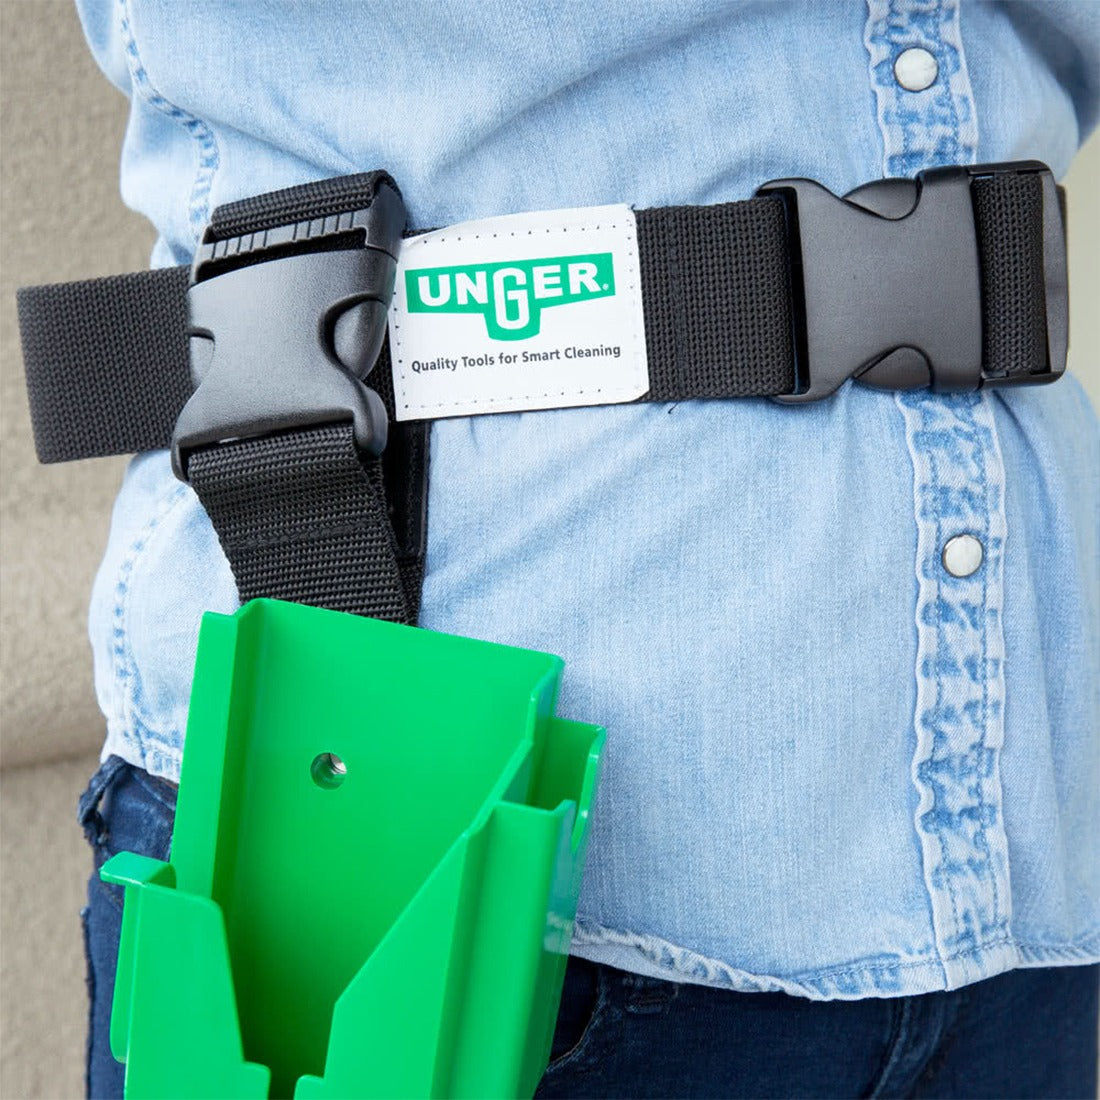 Unger Belt - Straped to Waist with Unger BOAB View